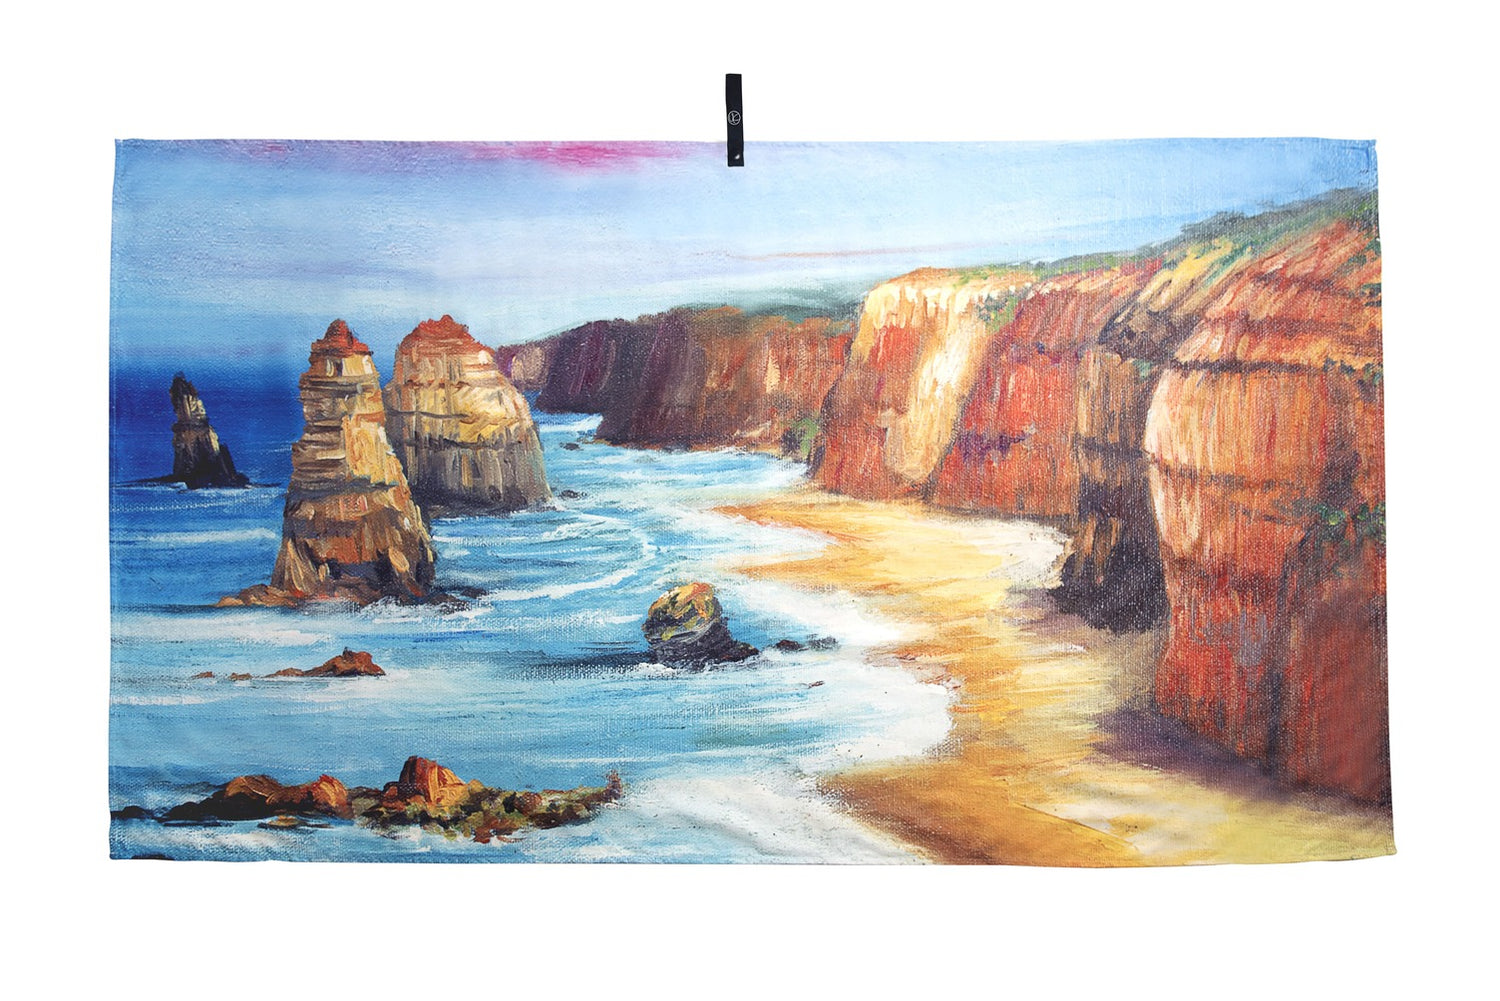 12 Apostles microfibre artistic towel. The towel shows an art inspiration of Victoria’s magnificent twelve apostles. The art printed on the towel shows the cliffs, the rough ocean, and sunset sky. Large size, 170cm x 95cm, soft touch, compact and sand free beach towel. An Aussie-inspired art showcasing magnificent landmarks and the Aussie lifestyle.